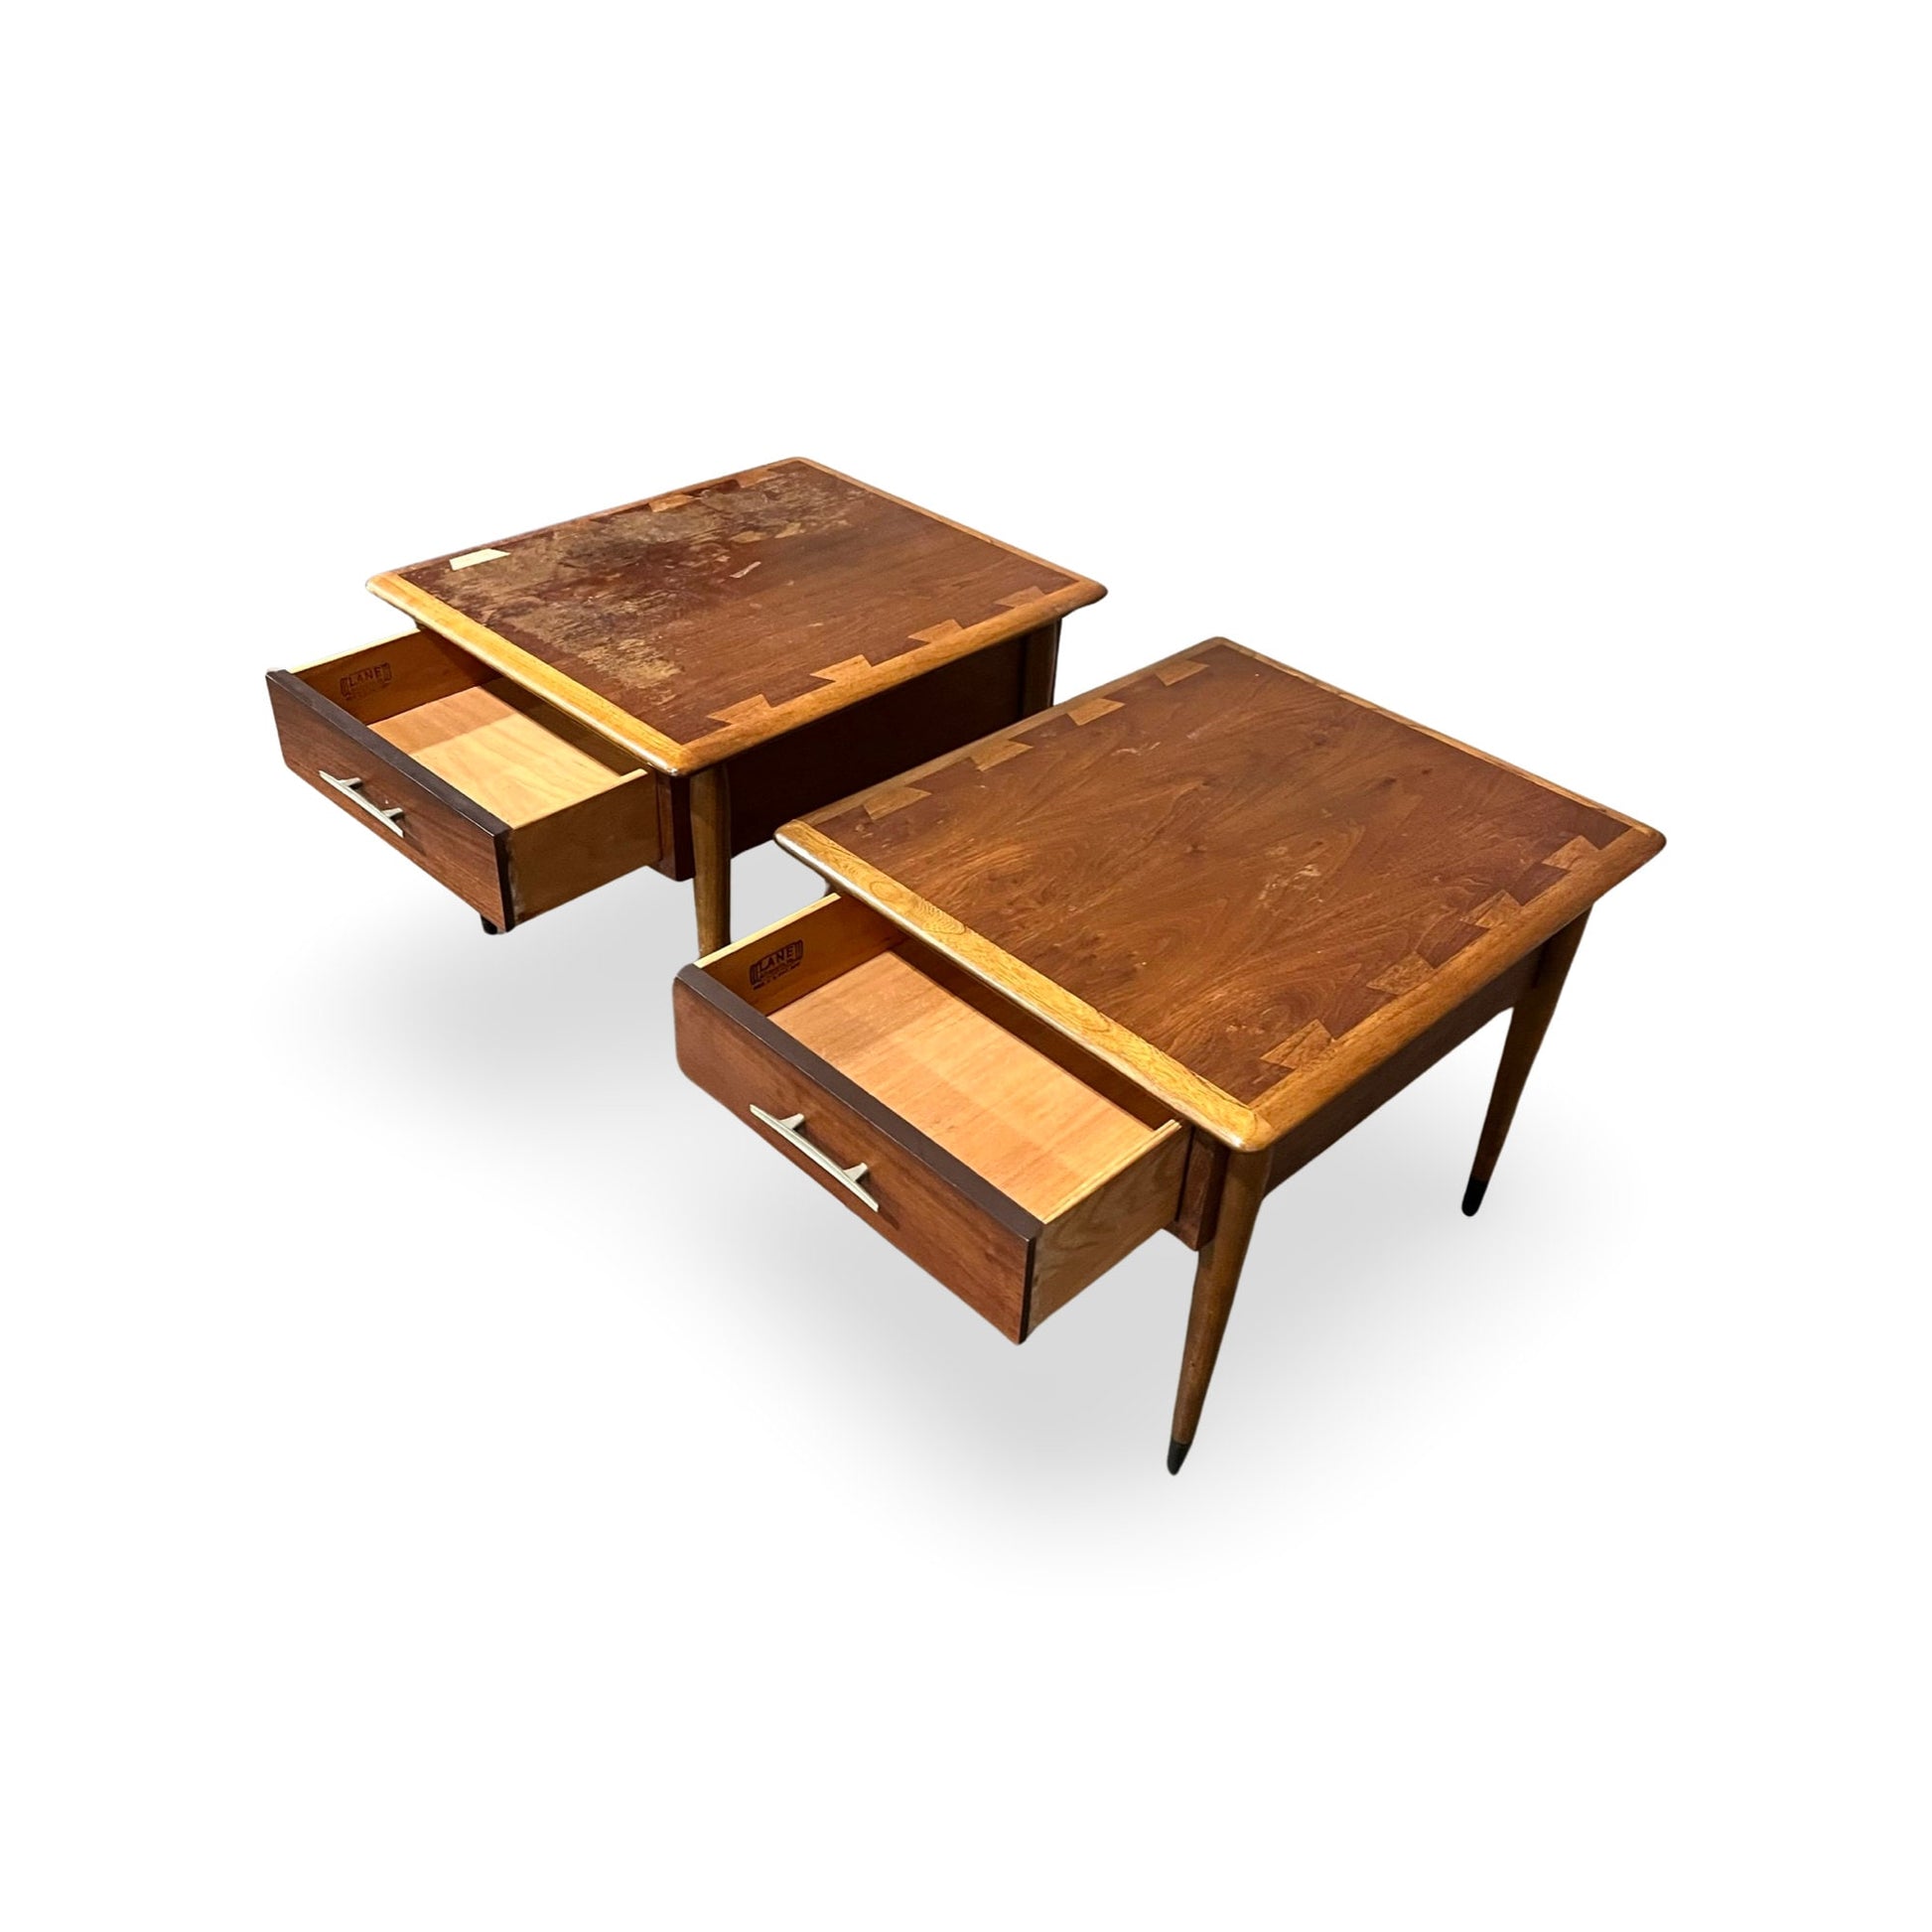 Timeless design Andre Bus end tables, reflecting 1960s craftsmanship and ingenuity.